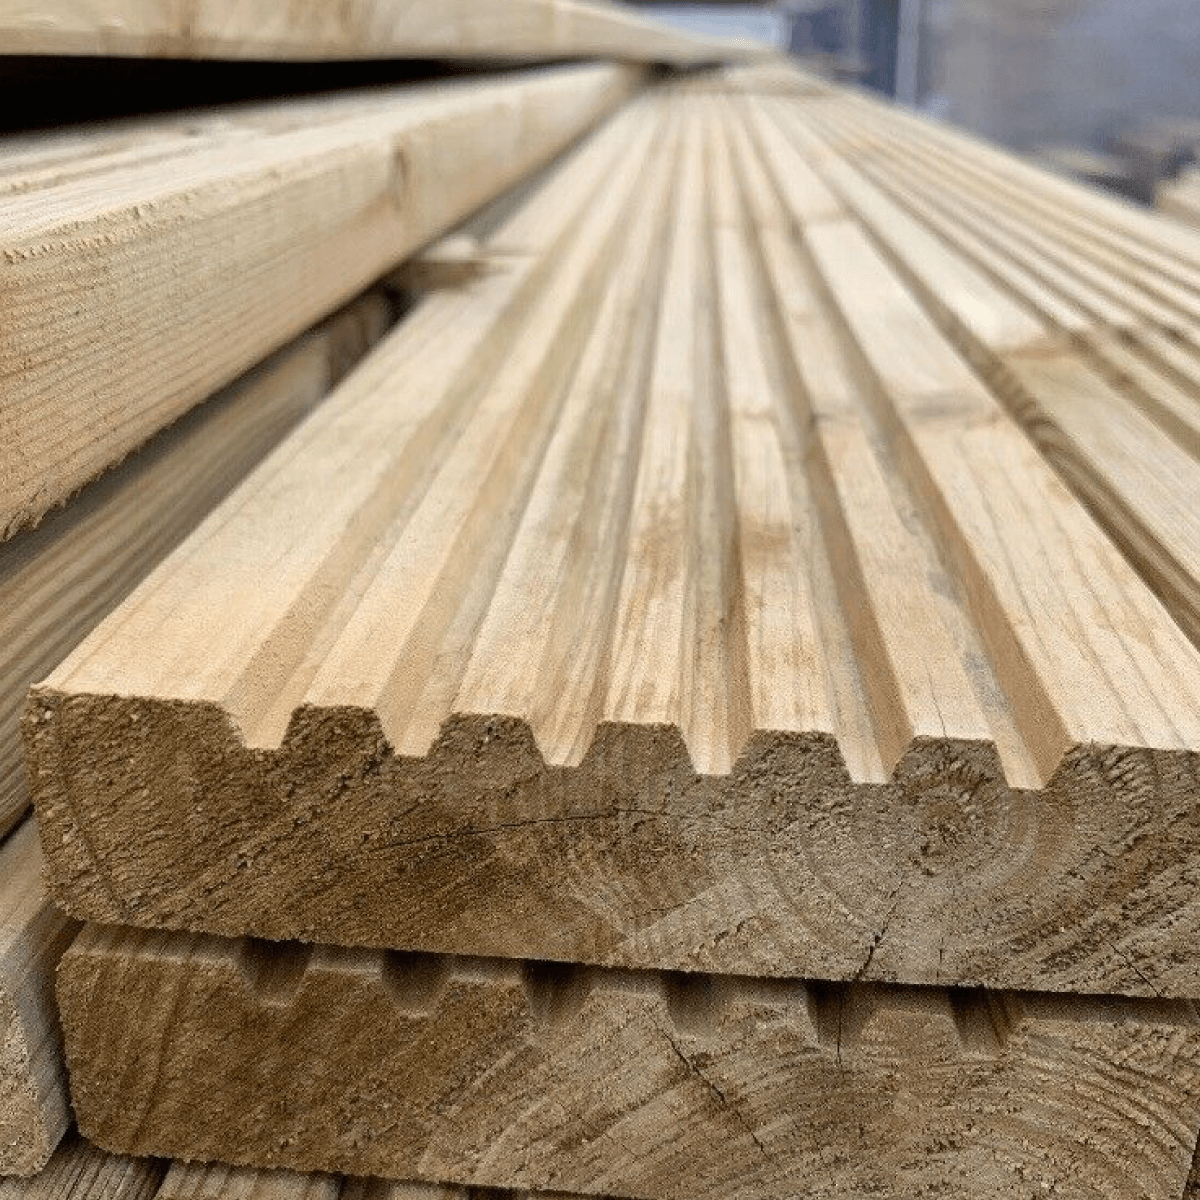 16ft Timber Decking Boards 6 145mm X 30mm | lupon.gov.ph